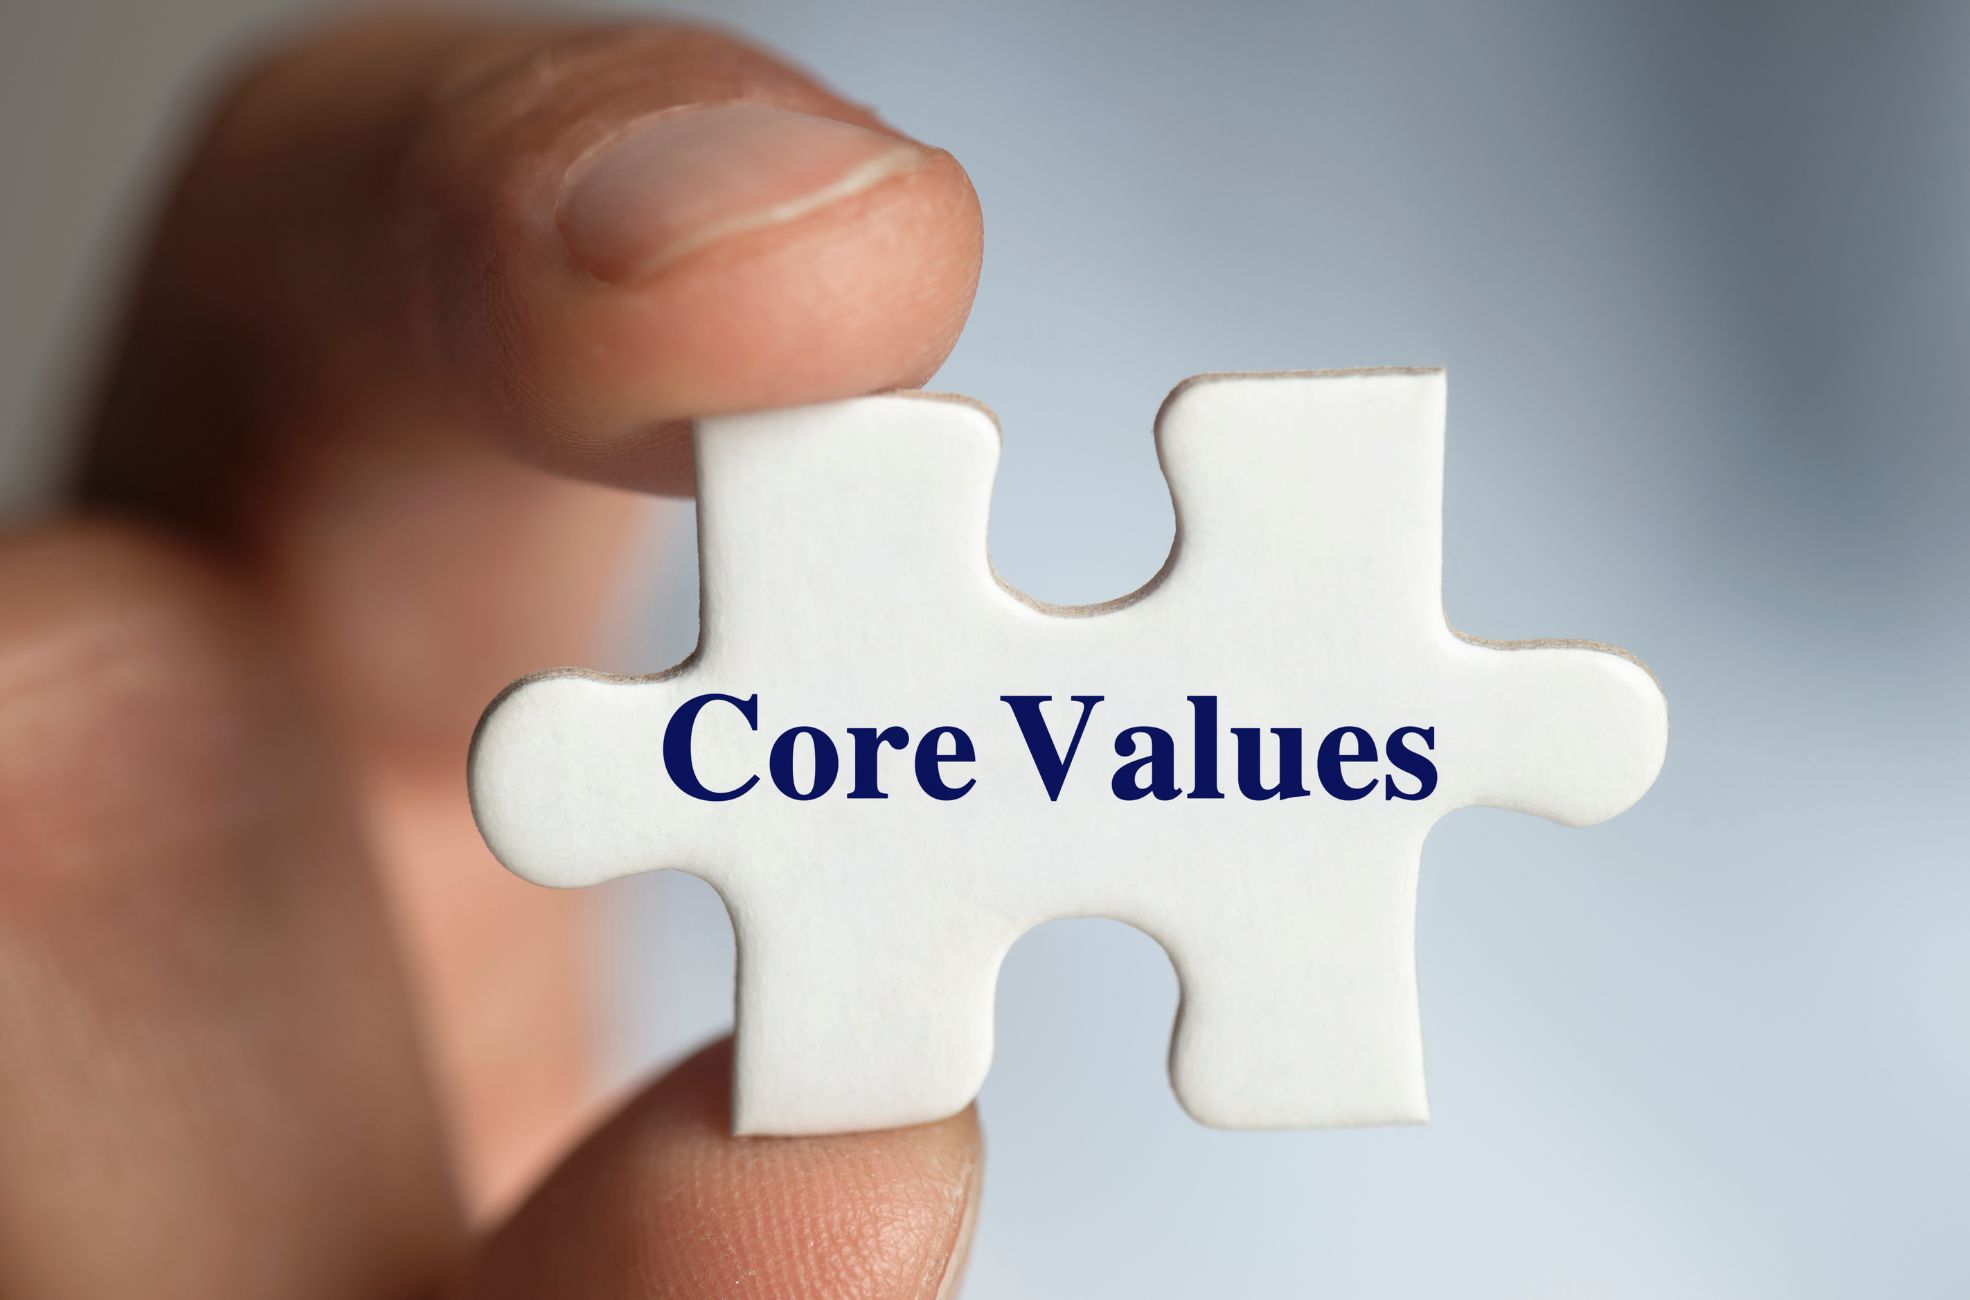 Benefits of Clarifying and Upholding Core Values in Business and Life